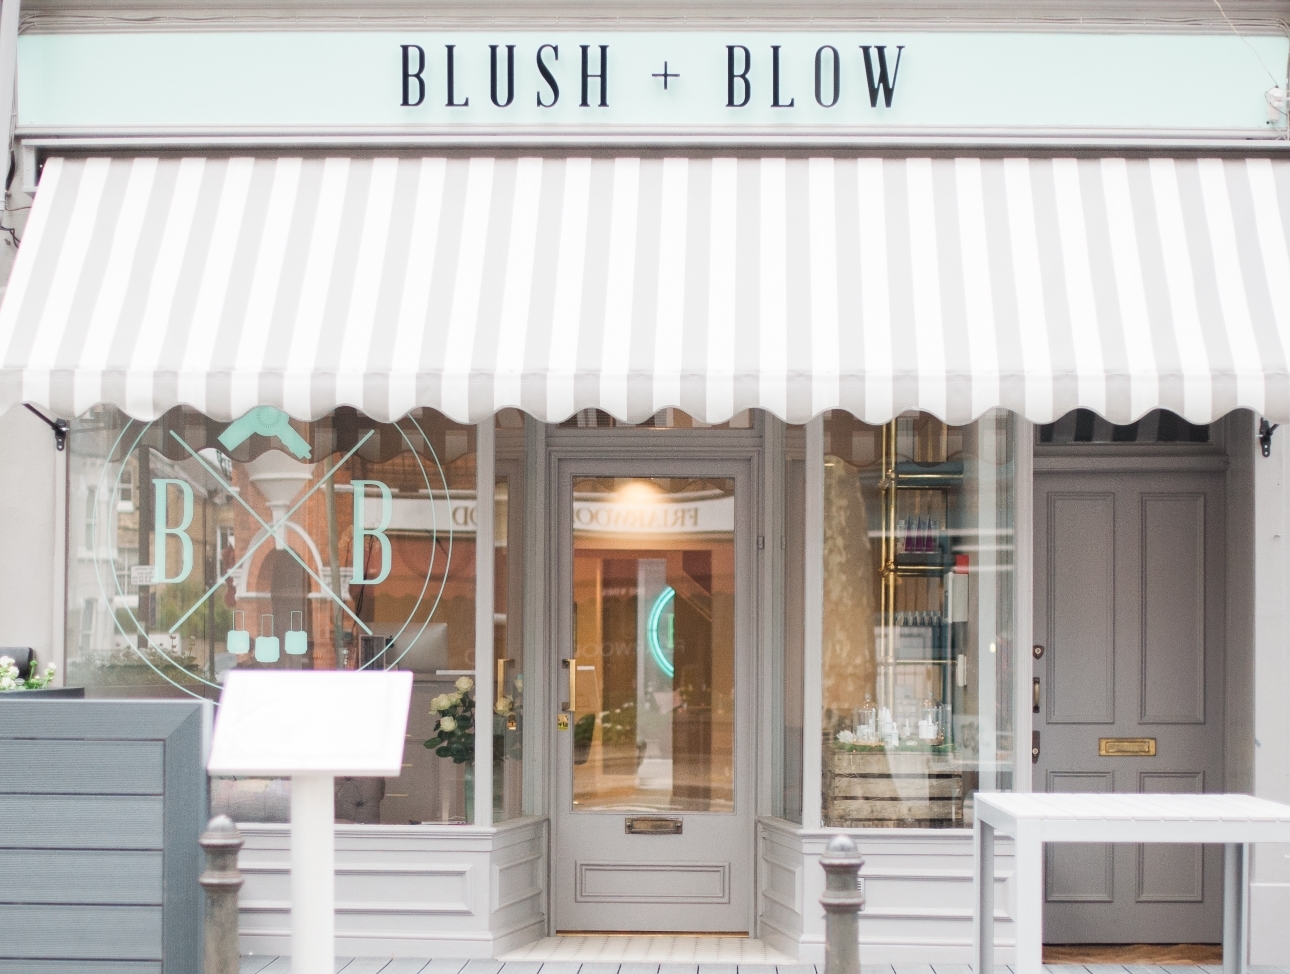 Five minutes with... Bridget O’Keefe, owner Blush + Blow salon: Image 1